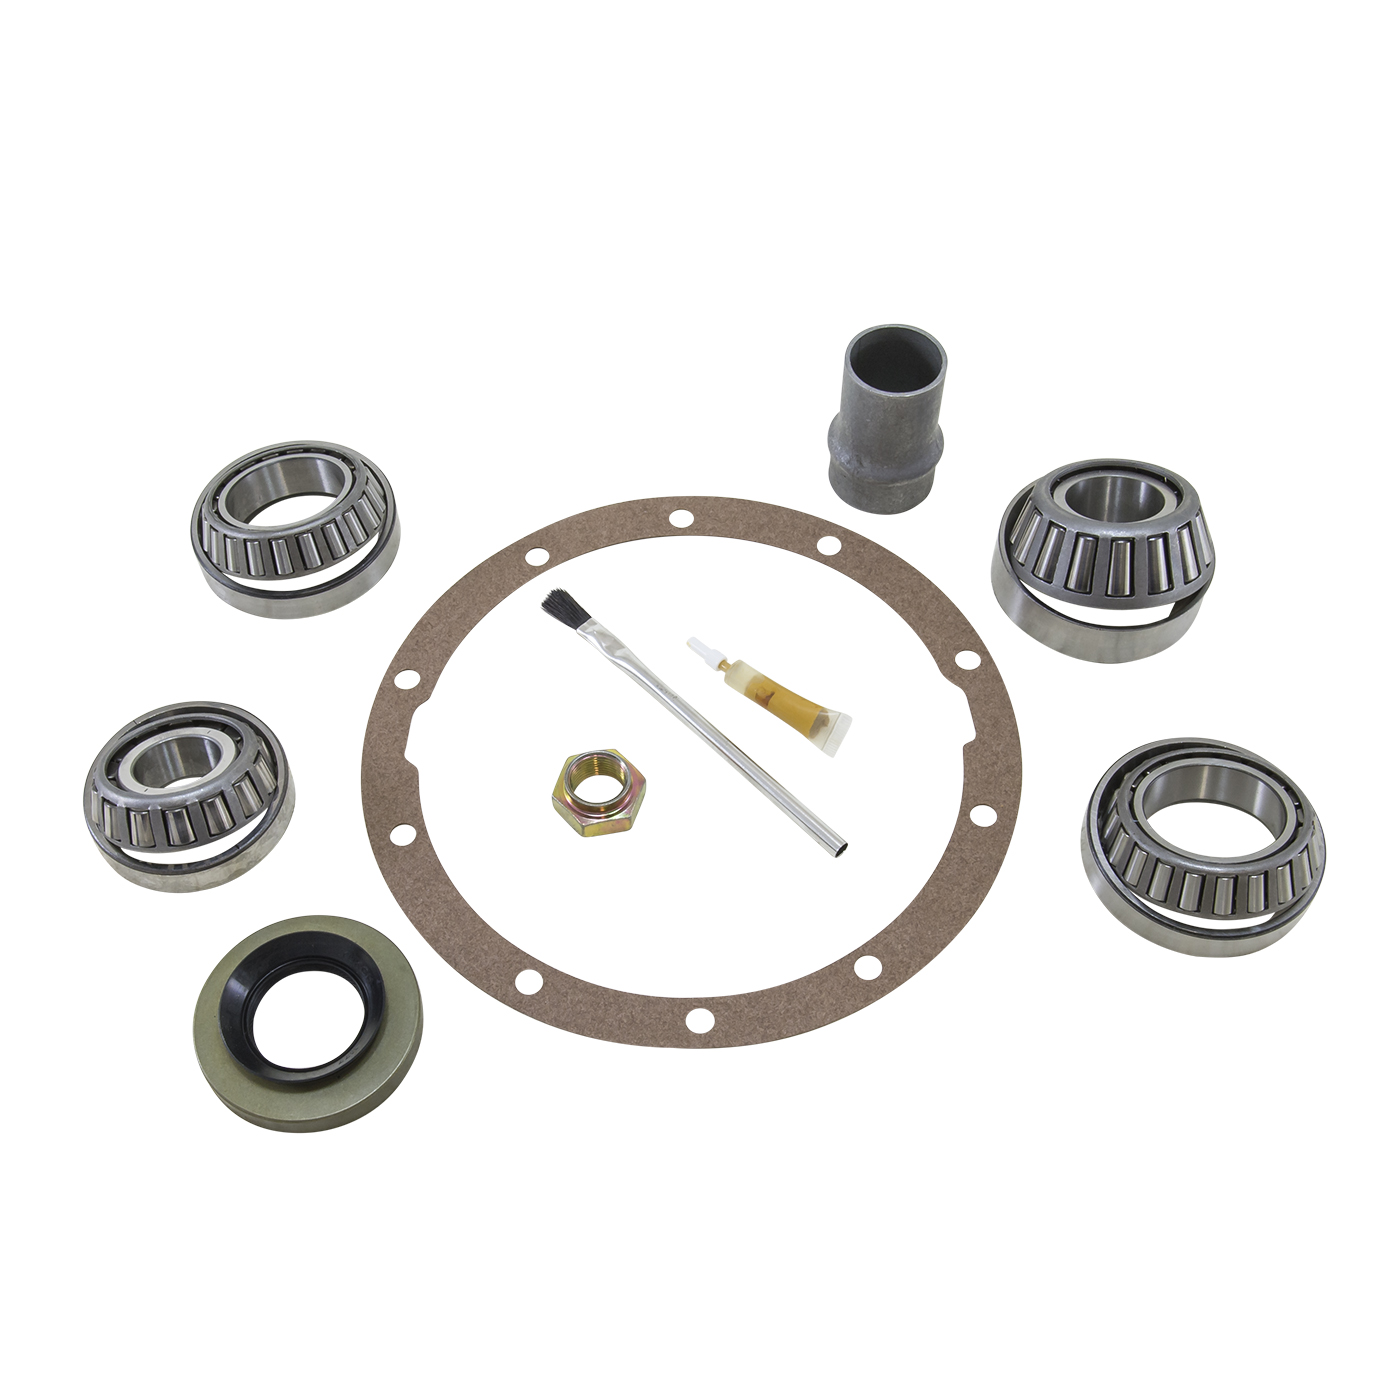 Bearing Install Kit For '91 And Newer Toyota Landcruiser Differential